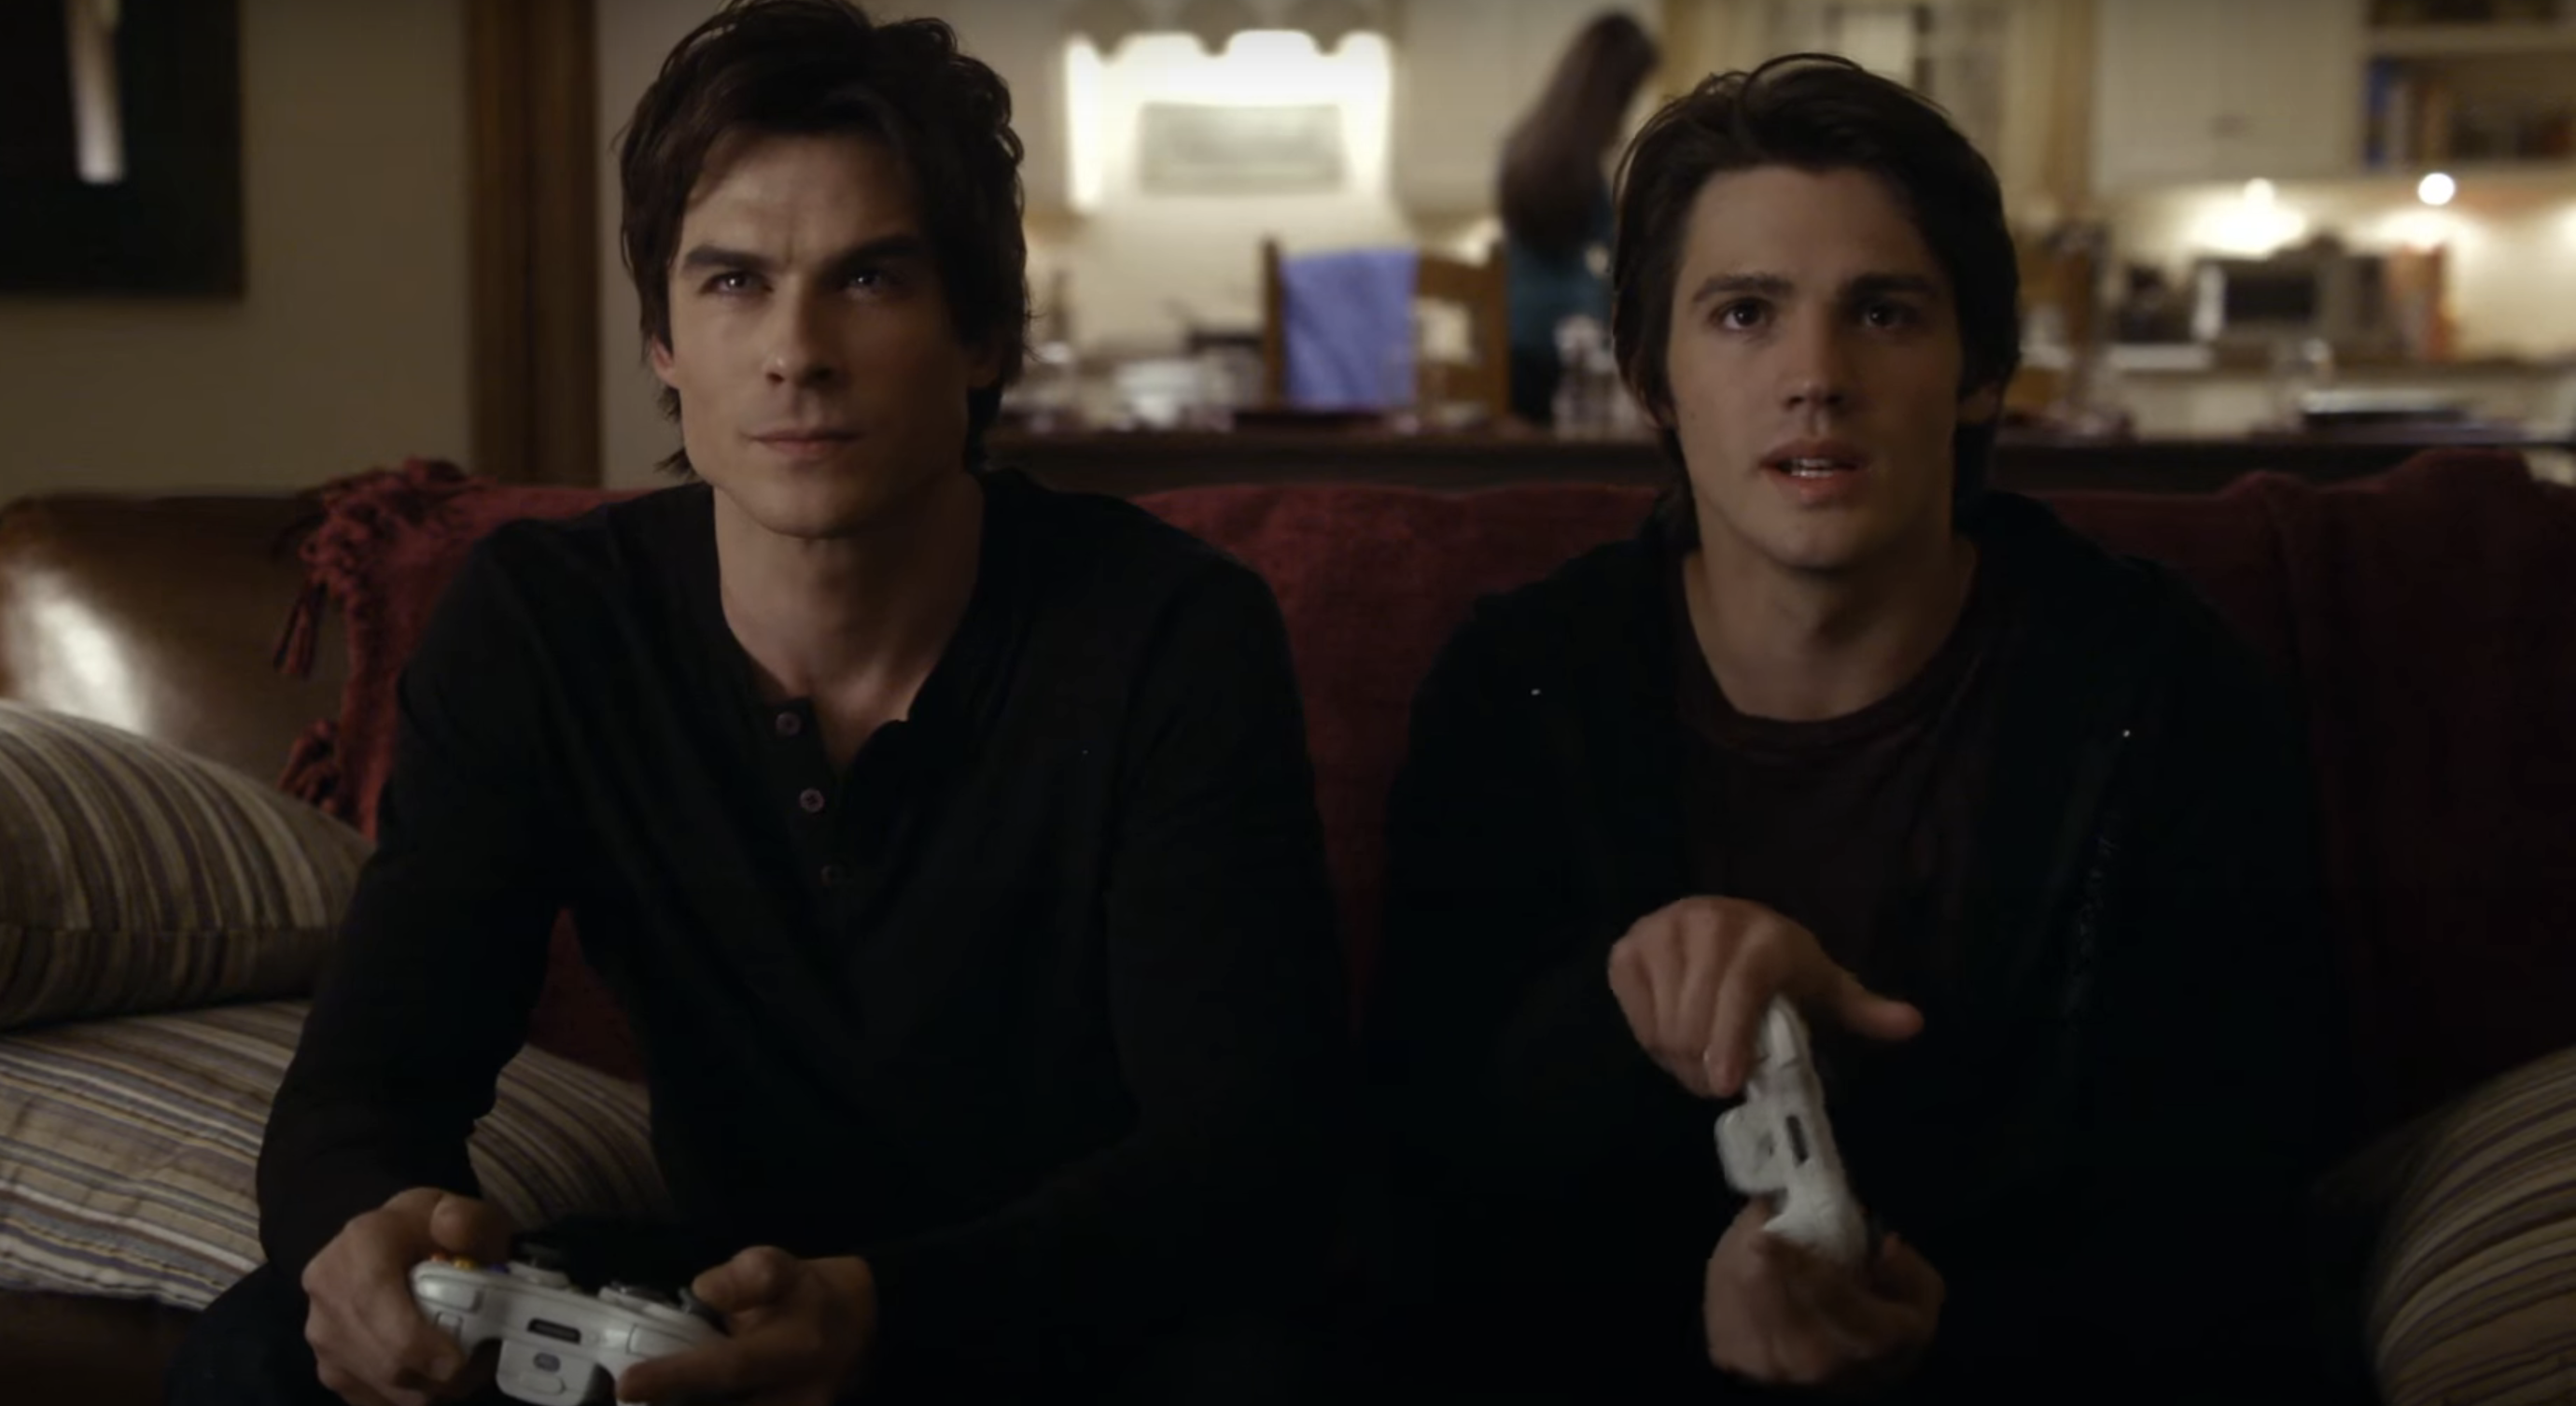 Damon and Stefan from The Vampire Diaries playing video games on a couch